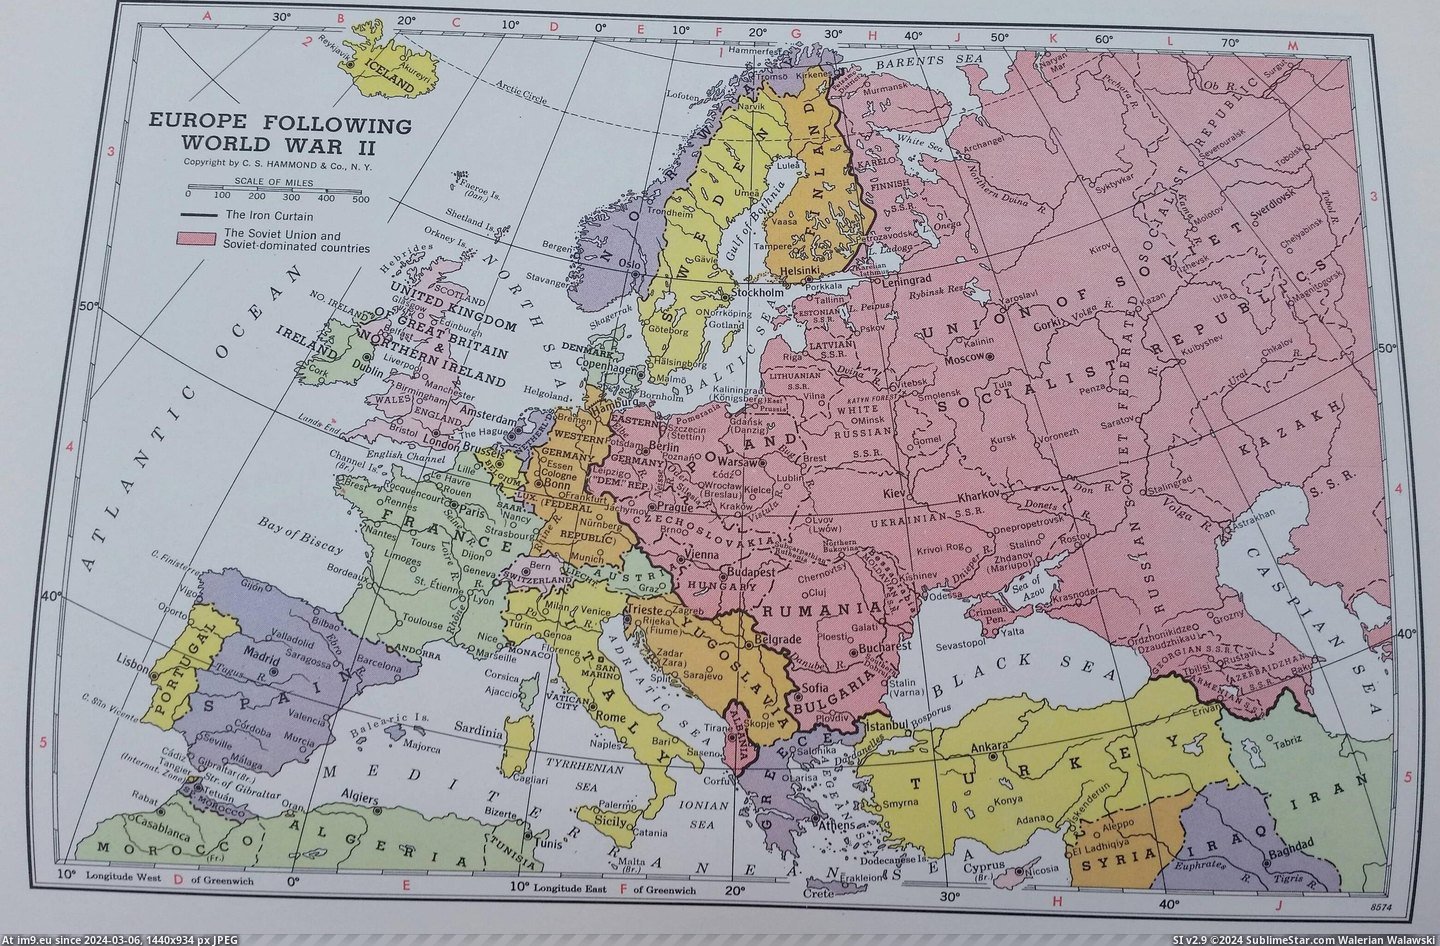 #World #Europe #War #Map [Mapporn] Map of Europe Following World War II [3120x2038] Pic. (Image of album My r/MAPS favs))